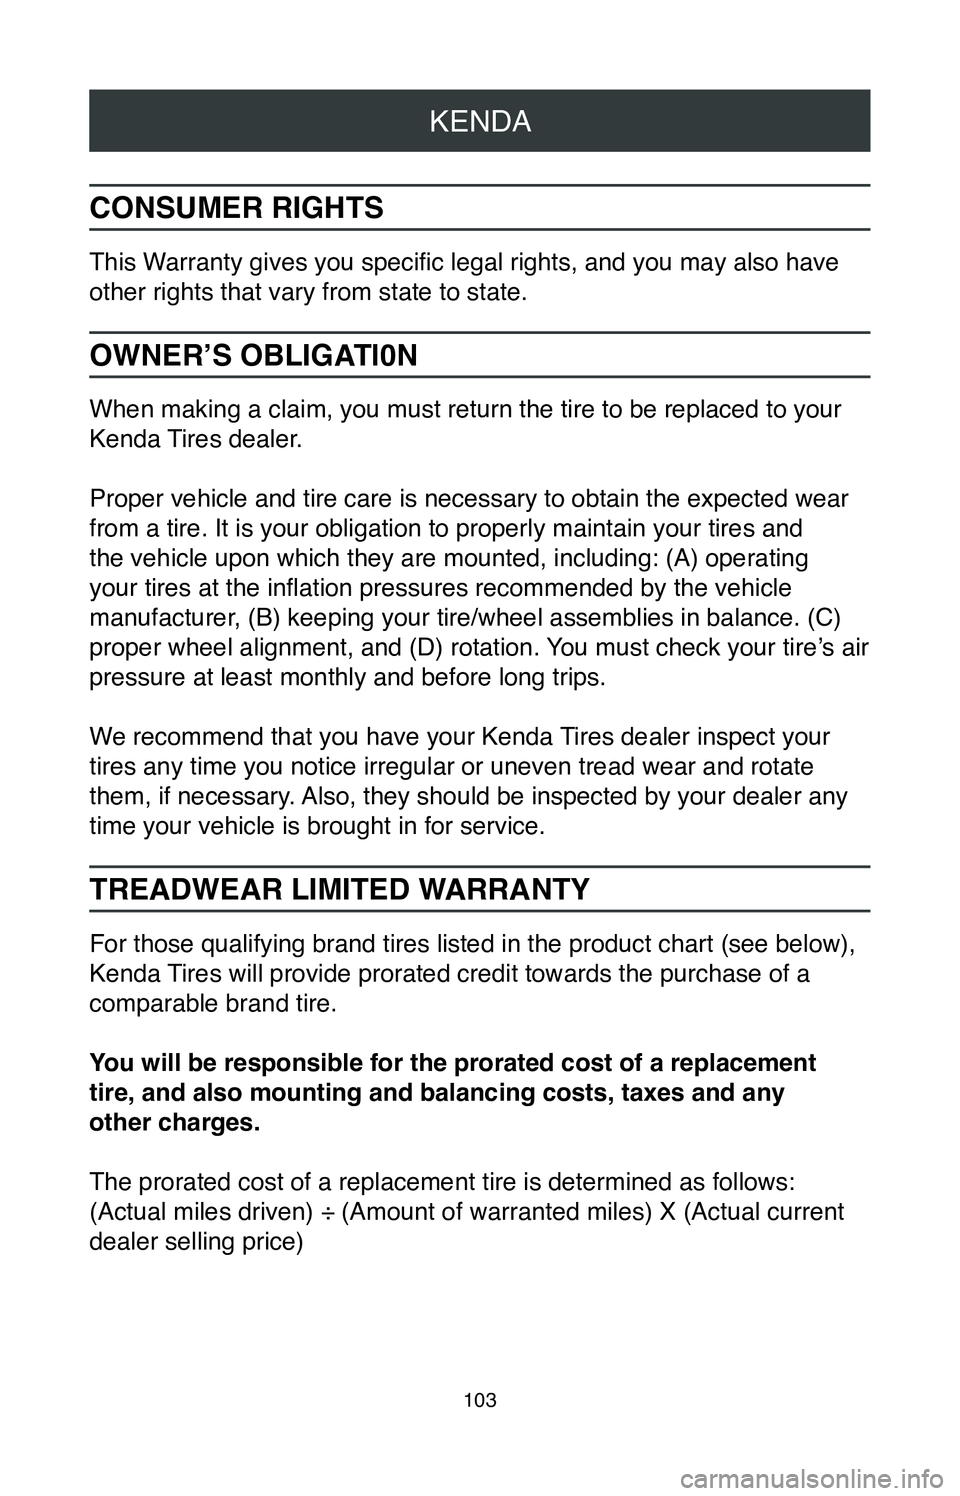 TOYOTA C-HR 2020  Warranties & Maintenance Guides (in English) KENDA
103
CONSUMER RIGHTS
This Warranty gives you specific legal rights, and you may also have 
other rights that vary from state to state.
OWNER’S OBLIGATl0N
When making a claim, you must return th